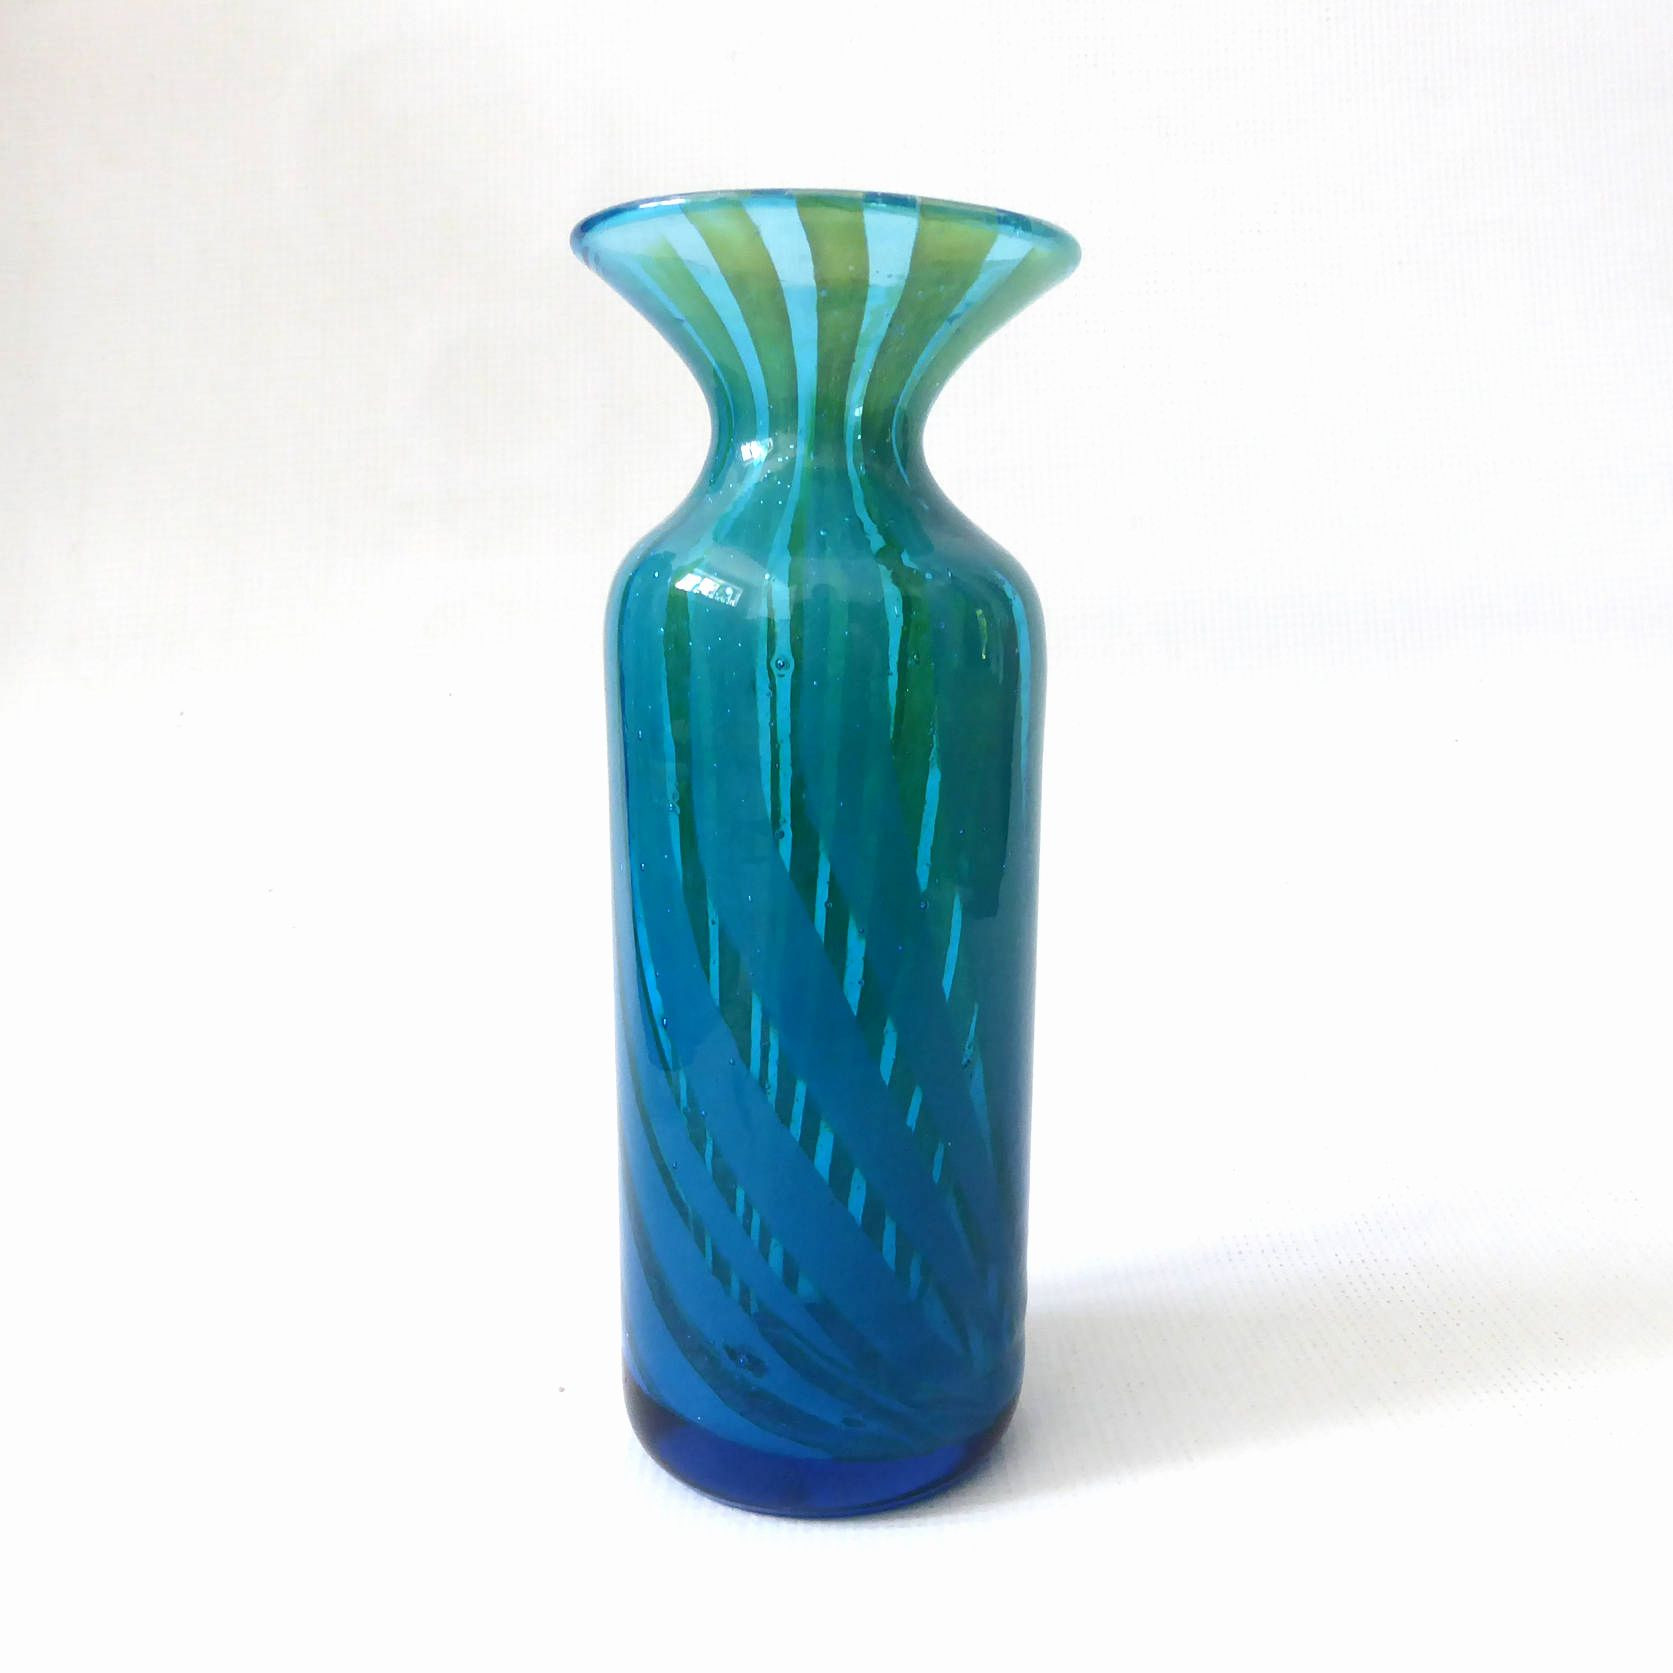 21 Stylish Art Glass Floor Vase 2024 free download art glass floor vase of 35 antique green glass vases the weekly world with antique glass vases identify vase and cellar image avorcor